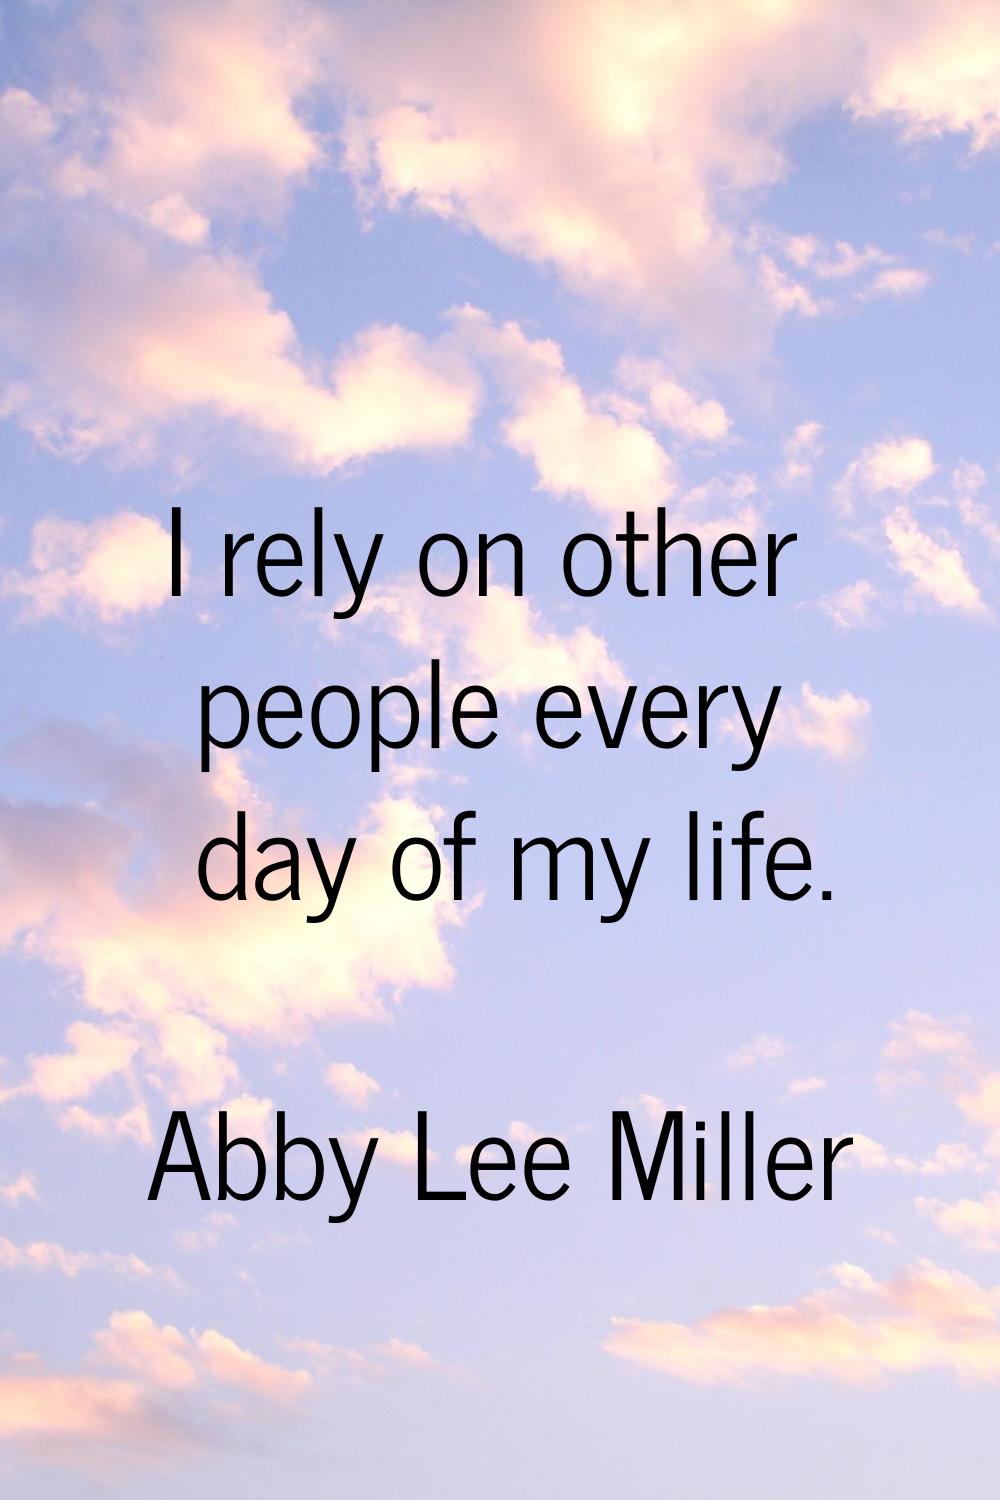 I rely on other people every day of my life.